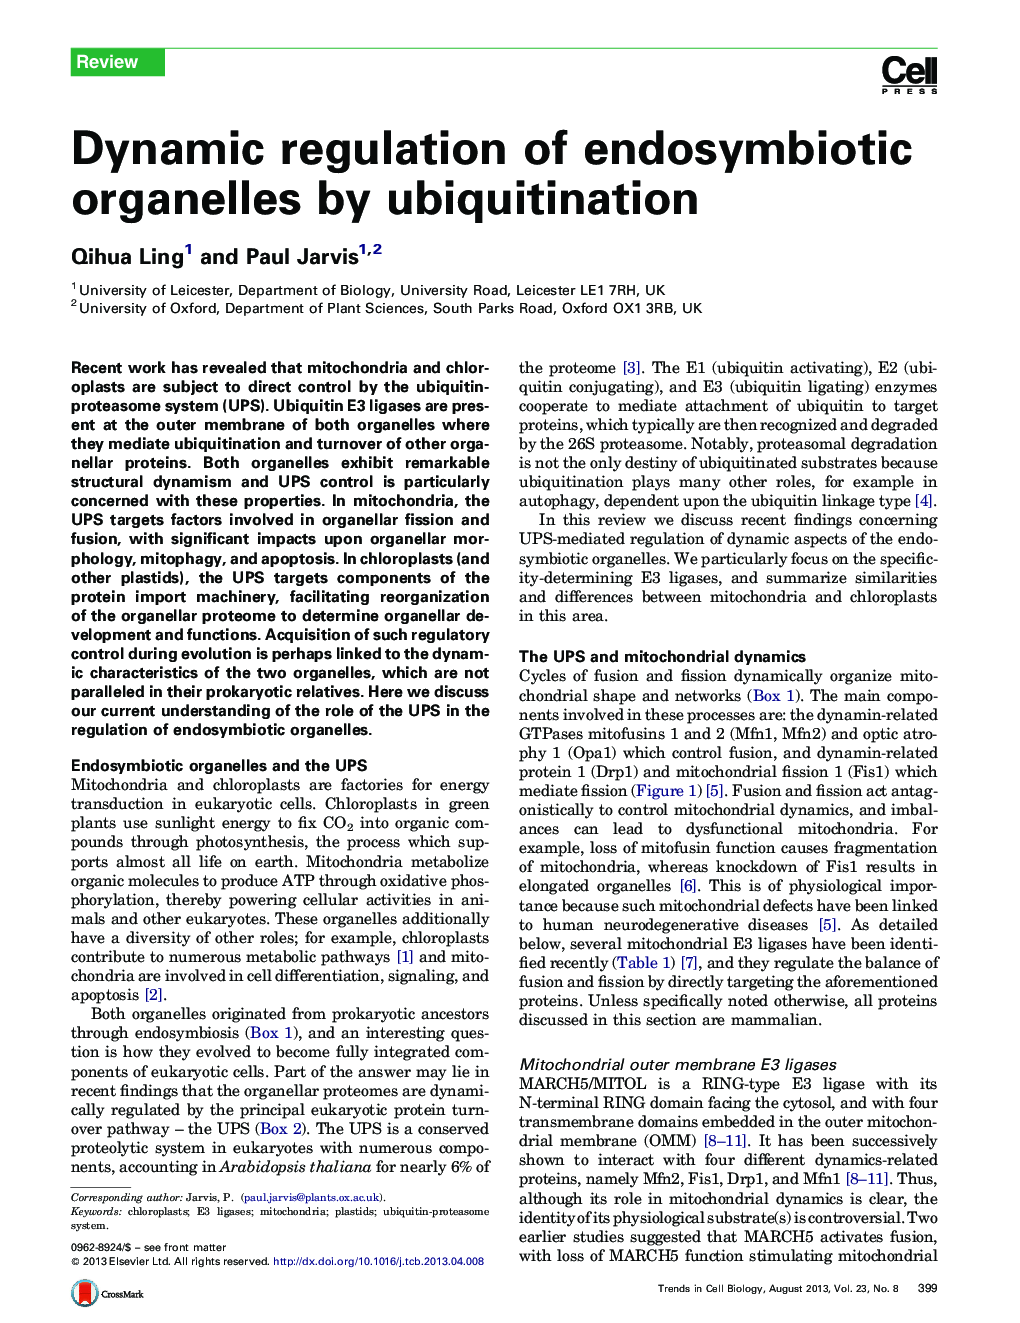 Dynamic regulation of endosymbiotic organelles by ubiquitination